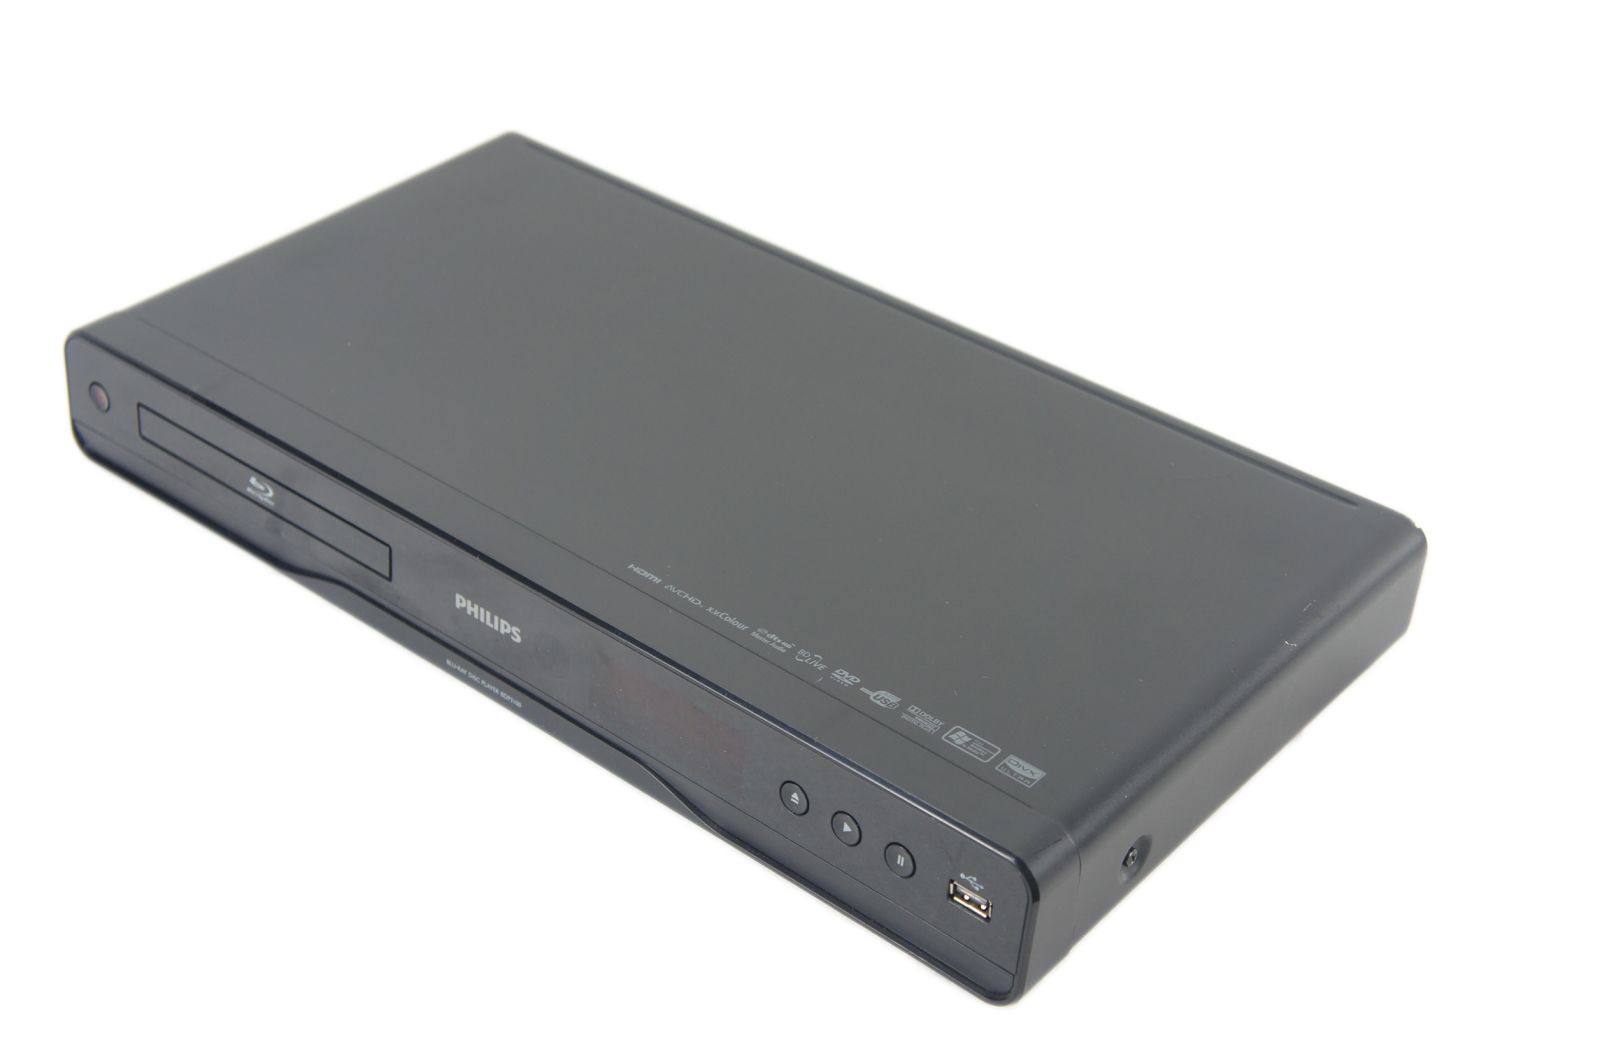 Philips_BDP3100-12_Blu_Ray_Player_08